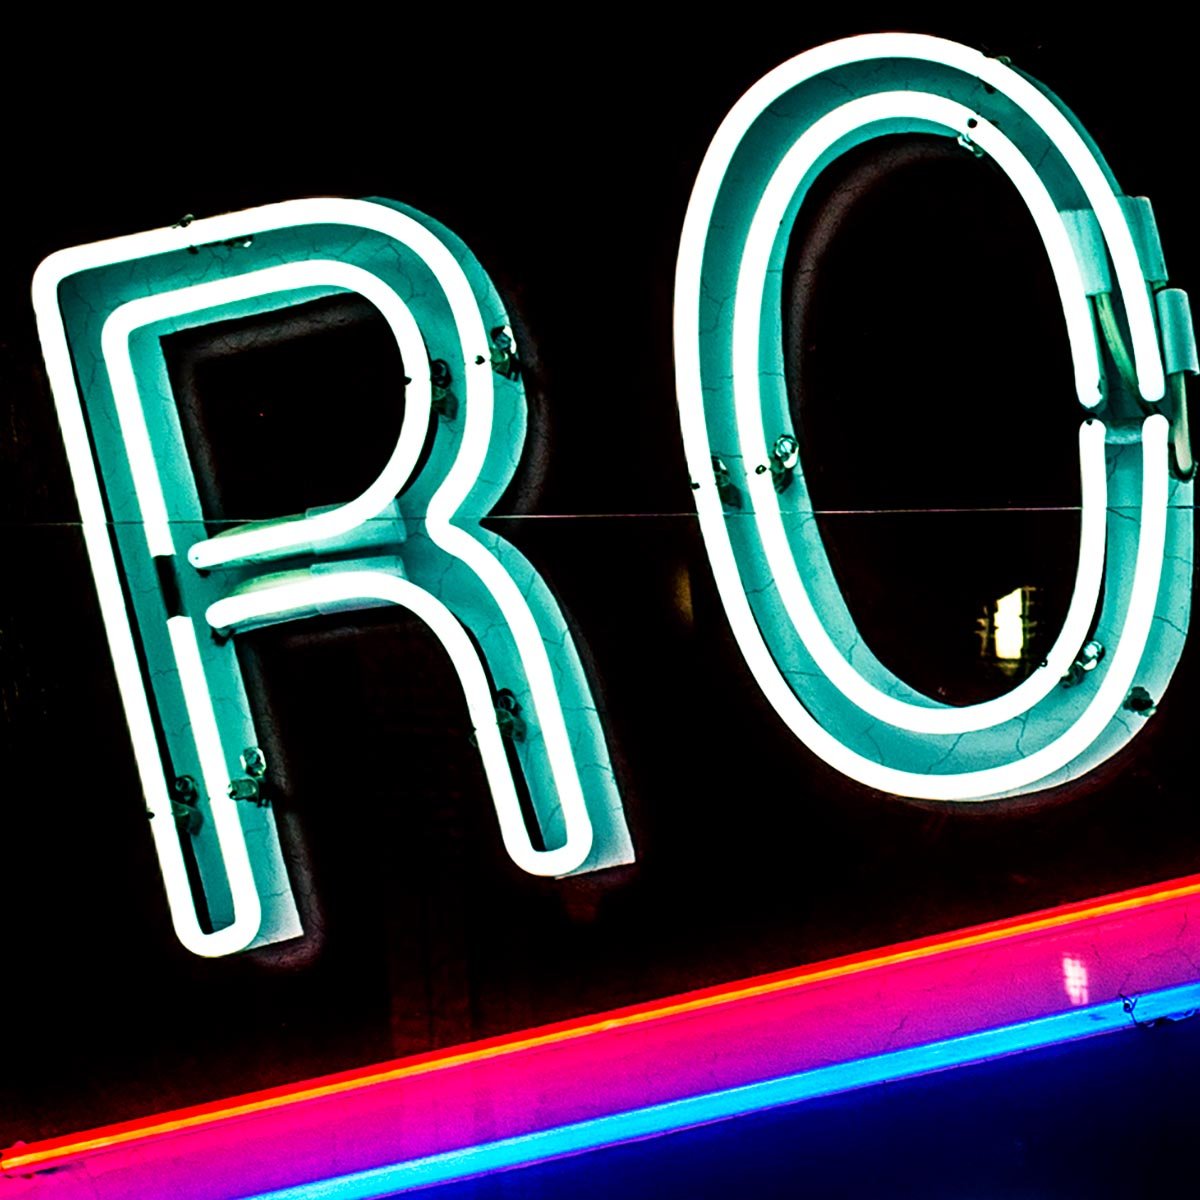 Route 66 Neon Sign by Carol M. Highsmith